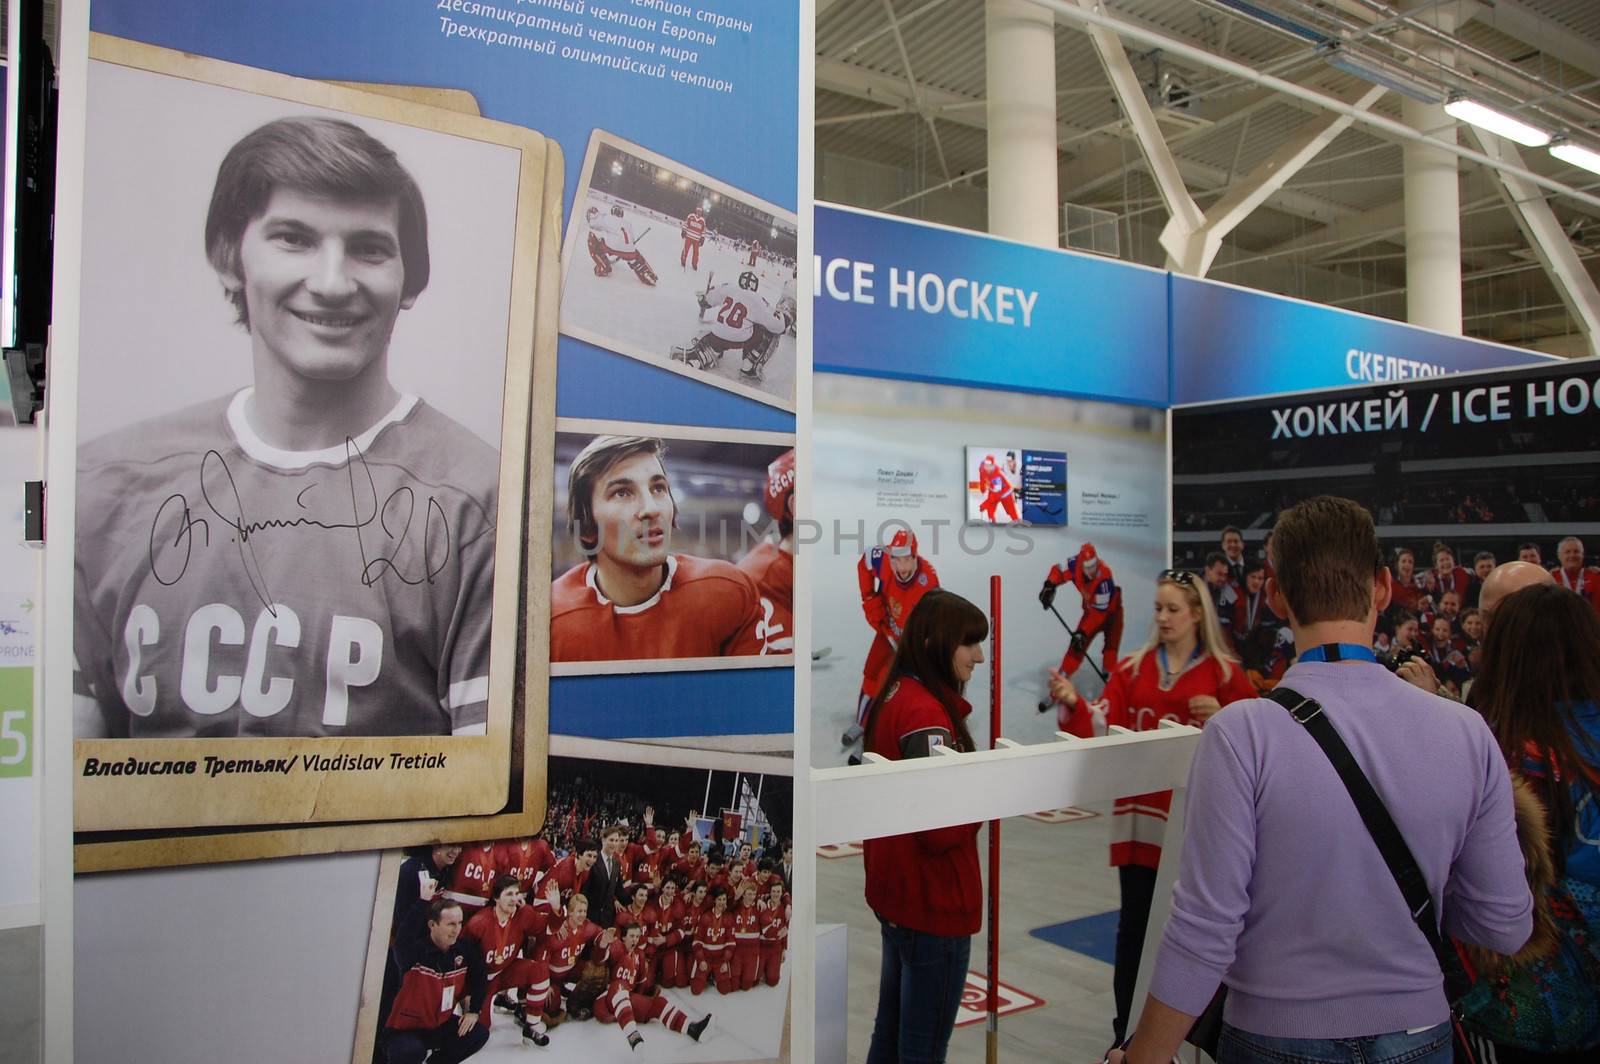 Ice hockey history exhibition stand at fans house XXII Winter Olympic Games Sochi 2014, Russia